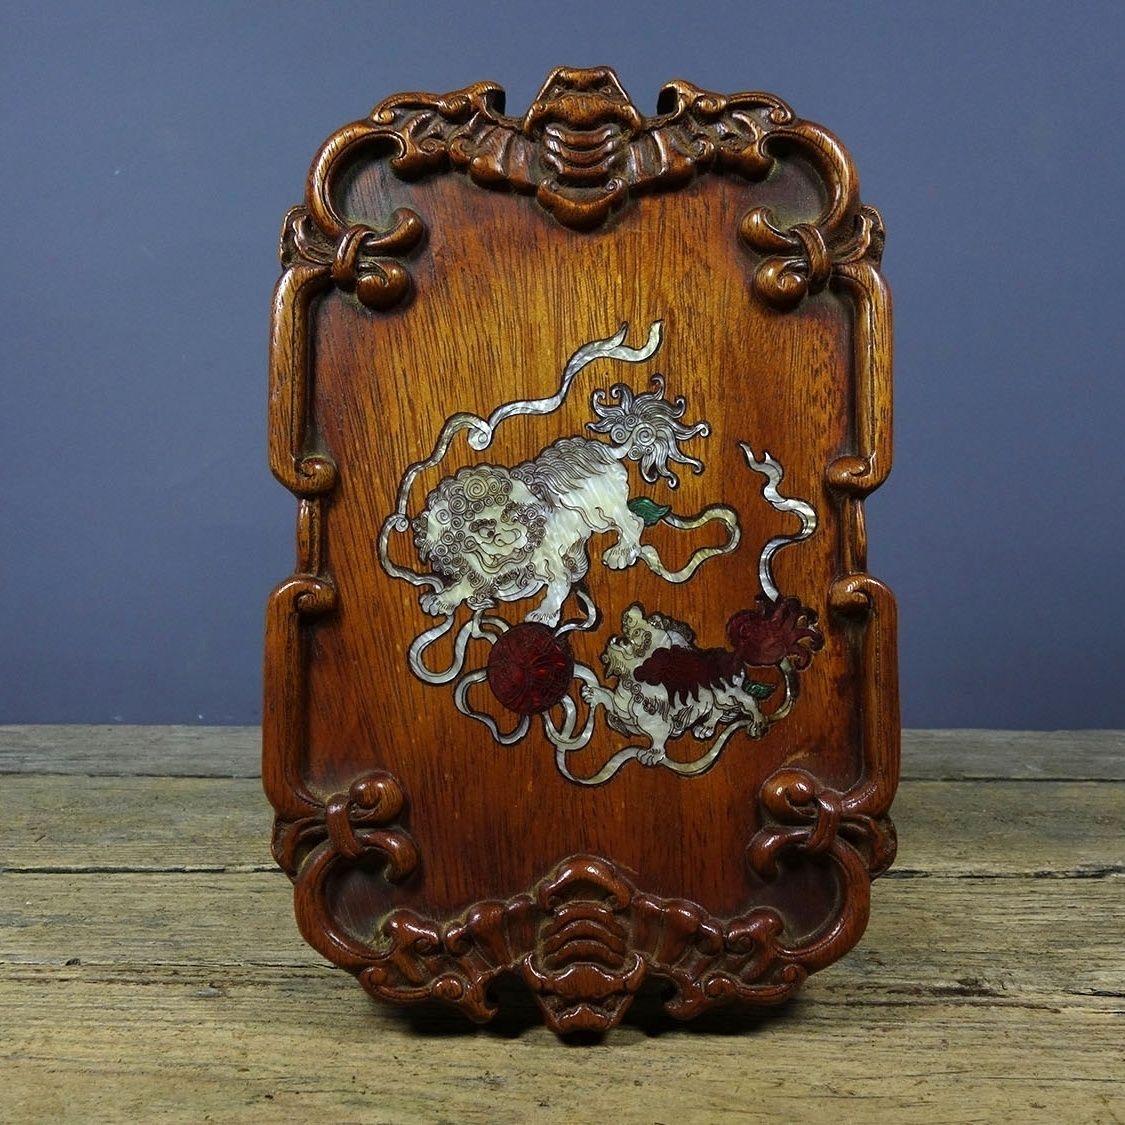 Chinese Antique Wood Carving Square Plate with White Lions 

This is a very old wooden square plate.
It was made in China 
The material is rosewood.

This wooden square plate is the original plate.
Although it has served its purpose, it remains here